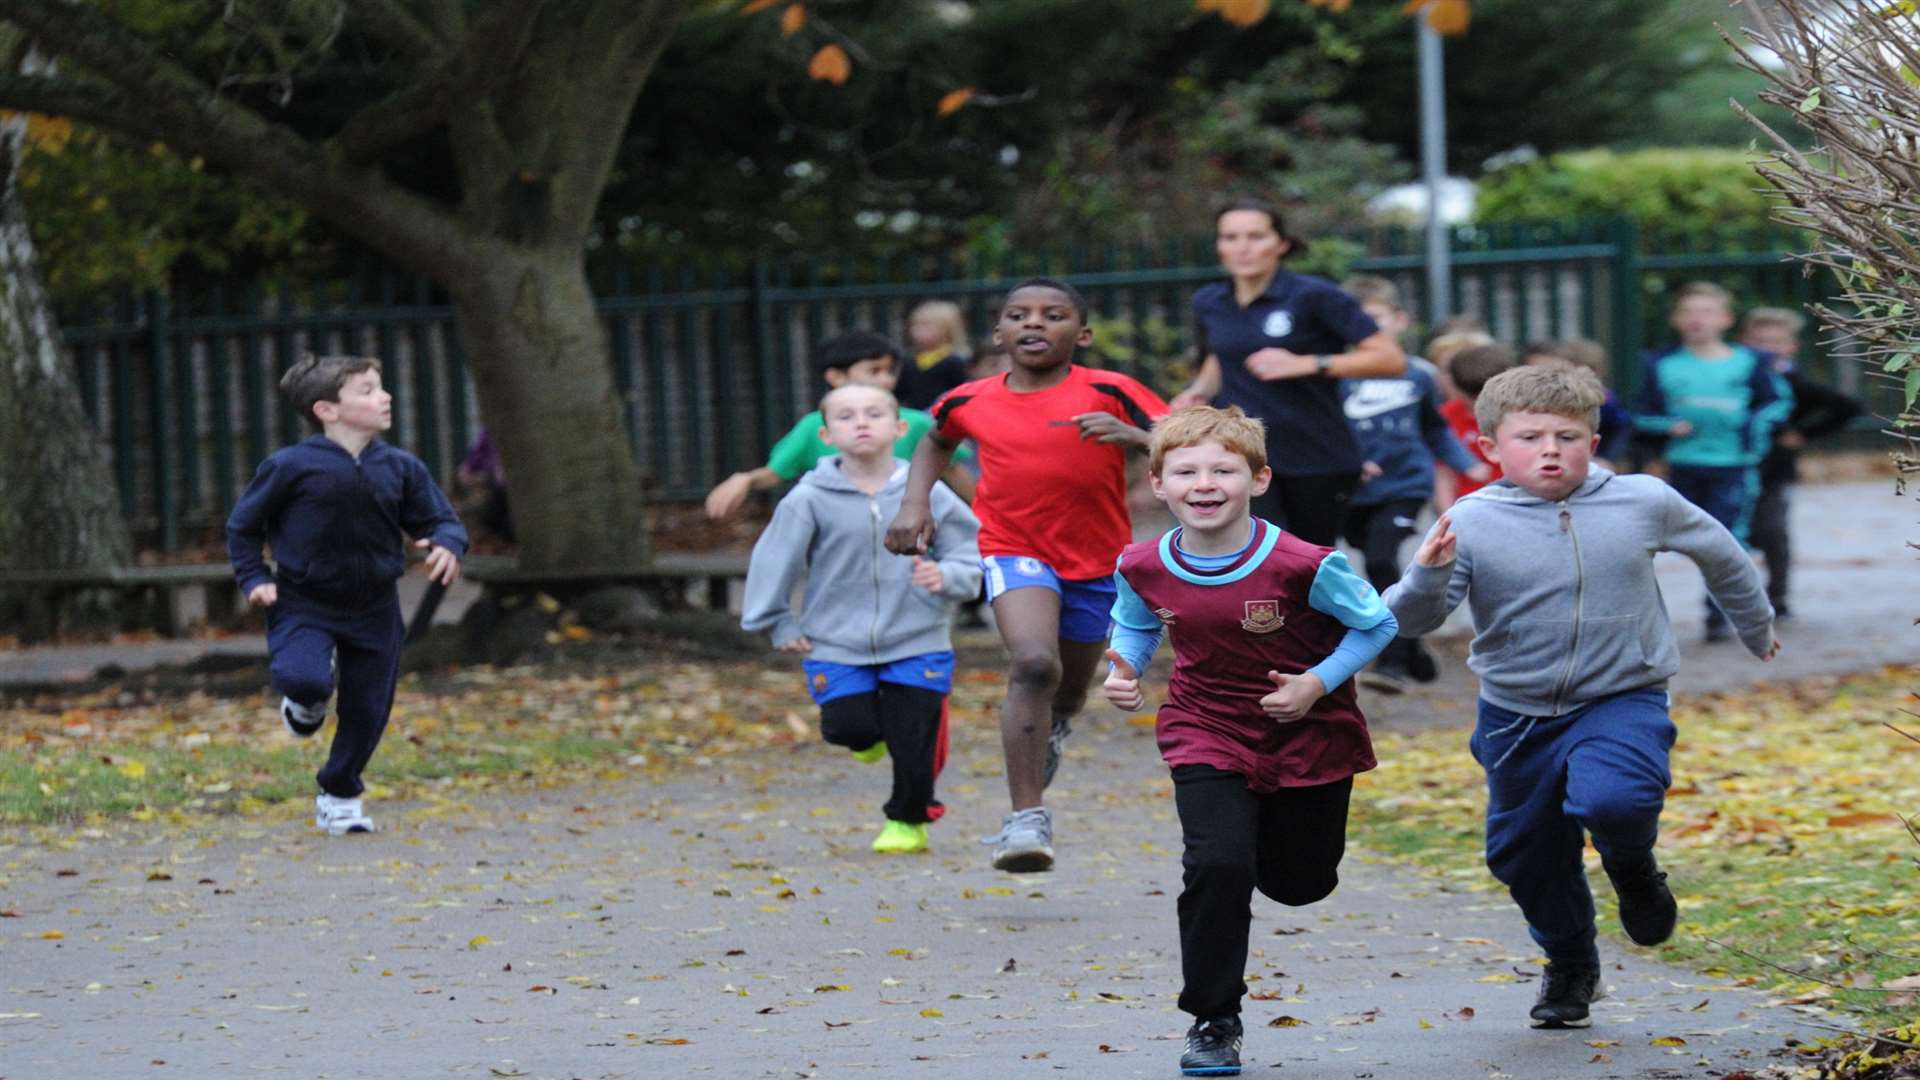 Fairview Primary is the first school in Medway to take up the challenge